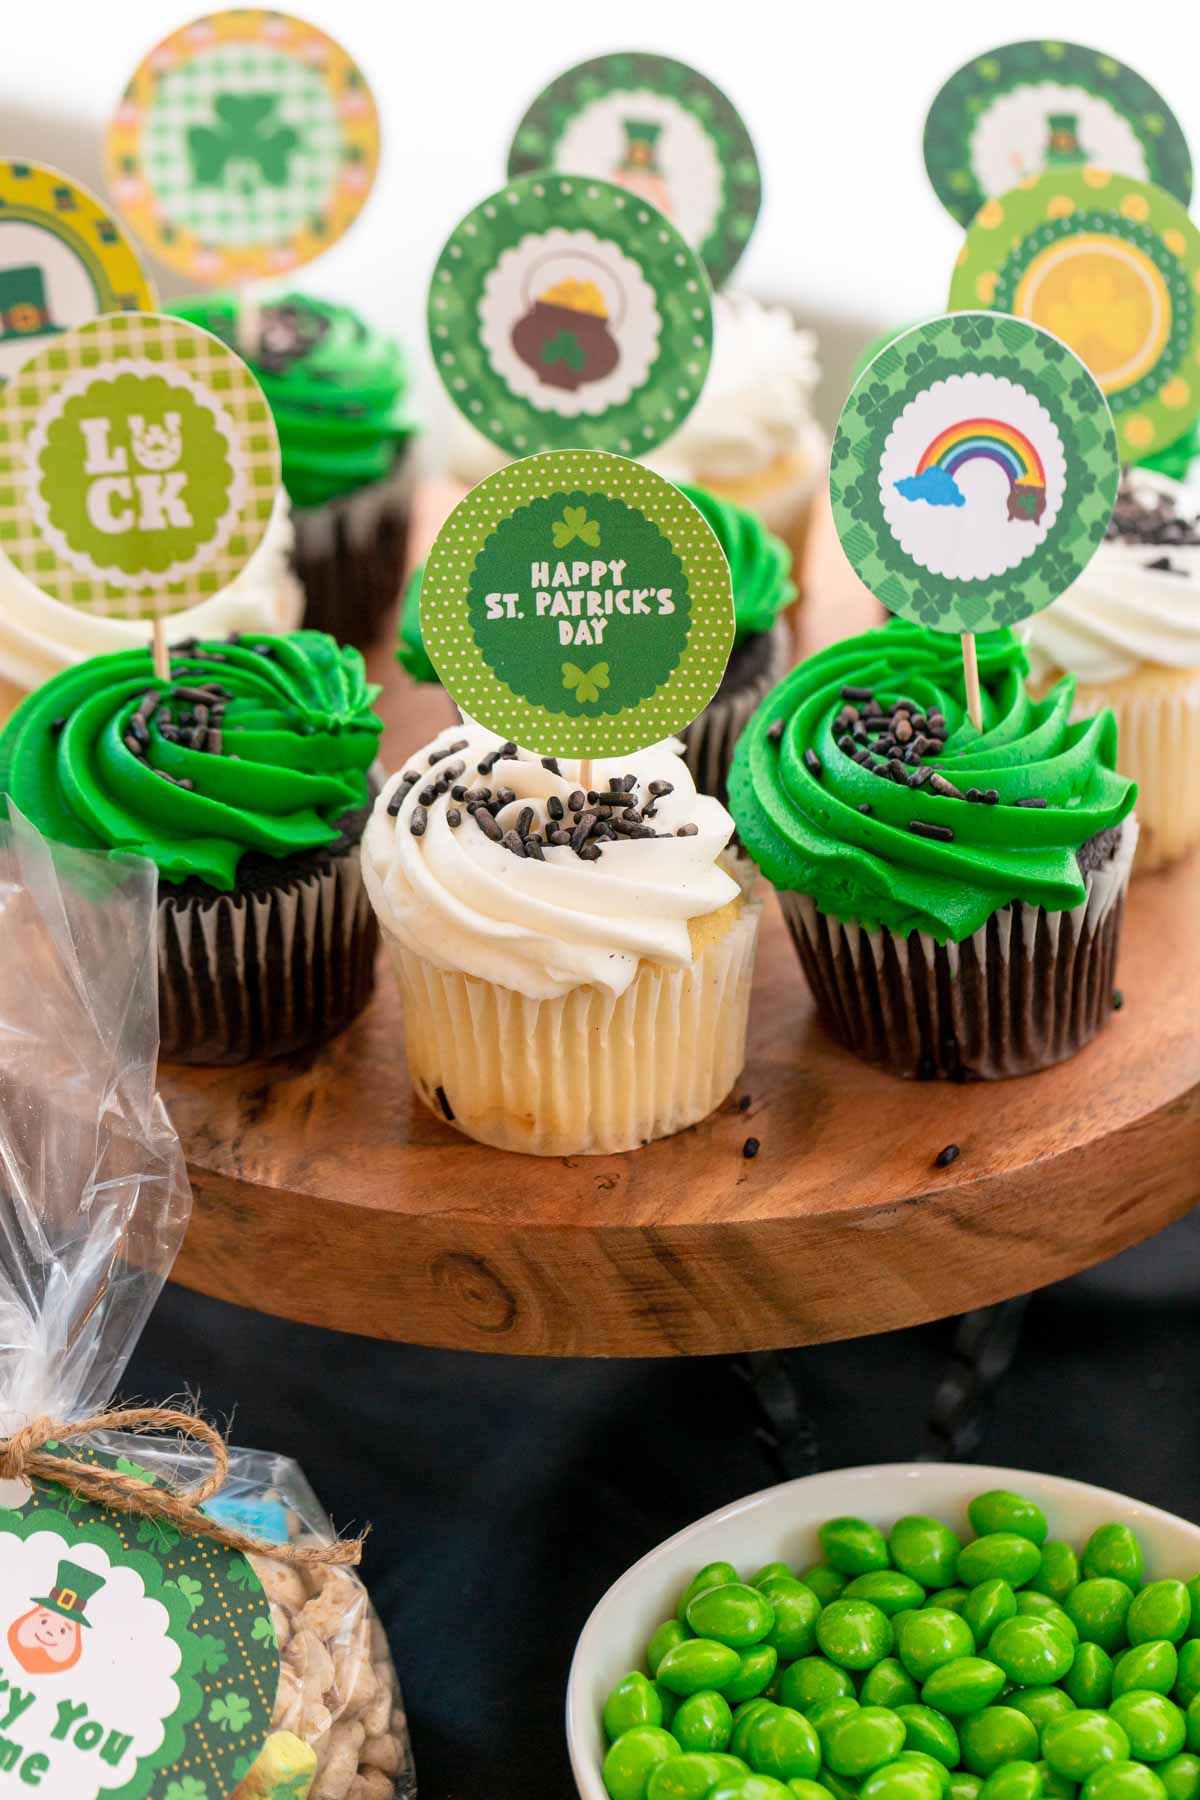 St. Patrick's Day cupcakes with cupcake toppers